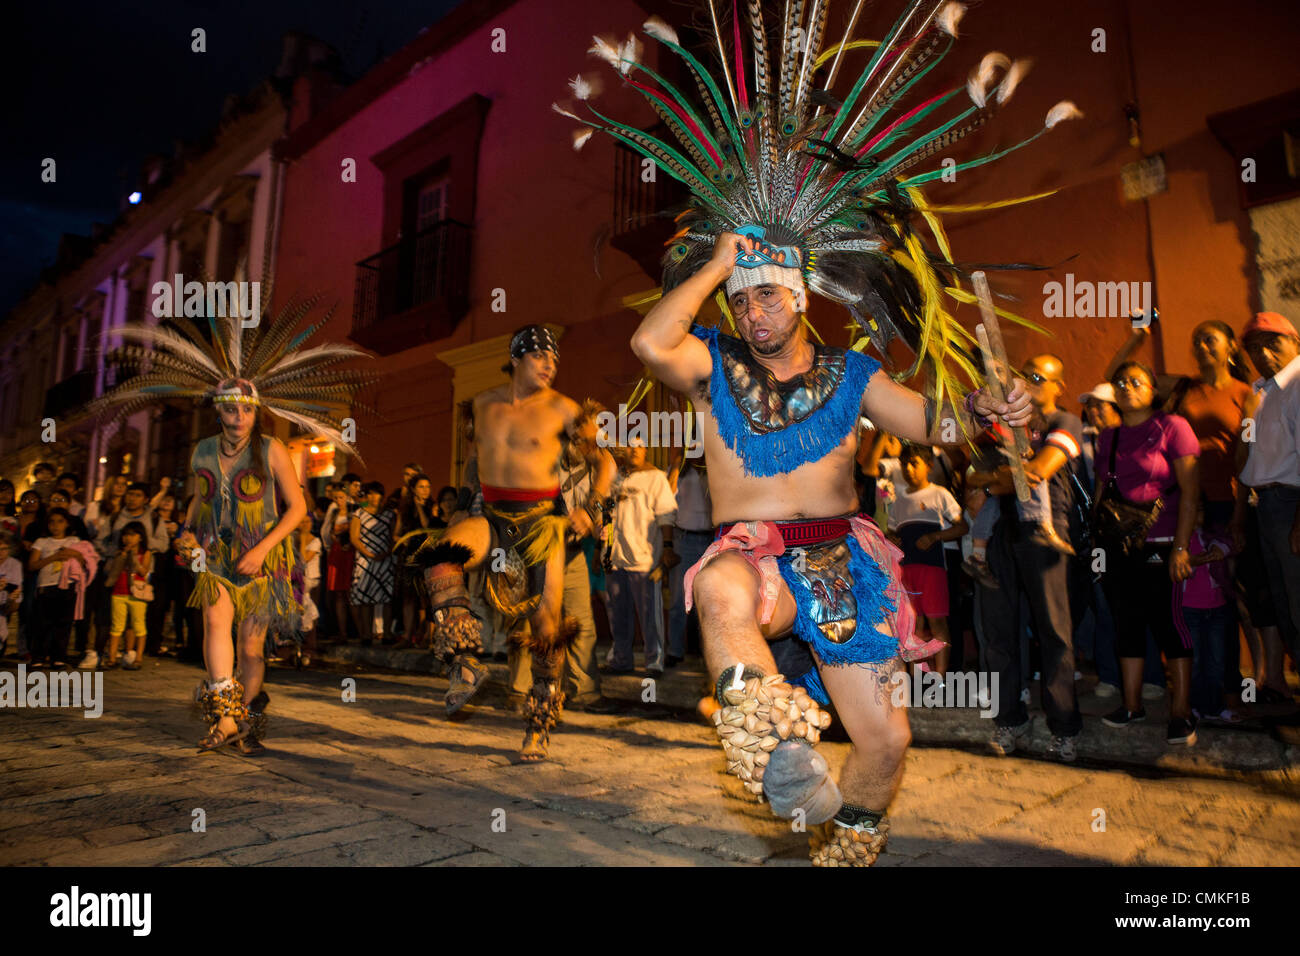 Revelers dressed as Mayan Indians parade through the streets dressed in costumes during the Day of the Dead Festival known in spanish as D’a de Muertos on November 1, 2013 in Oaxaca, Mexico. Stock Photo